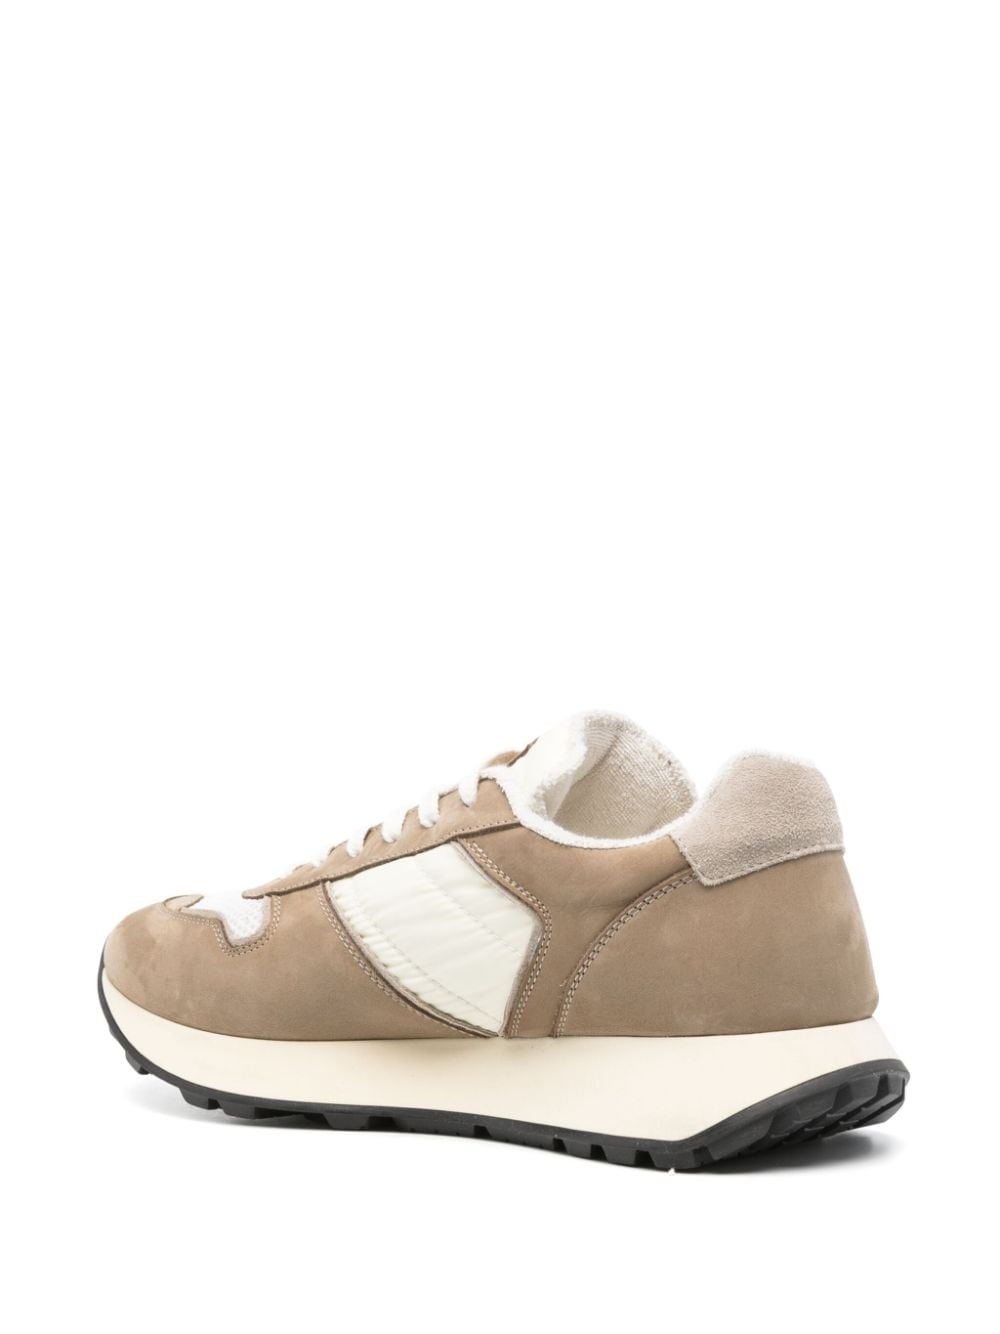 panelled suede sneakers - 3